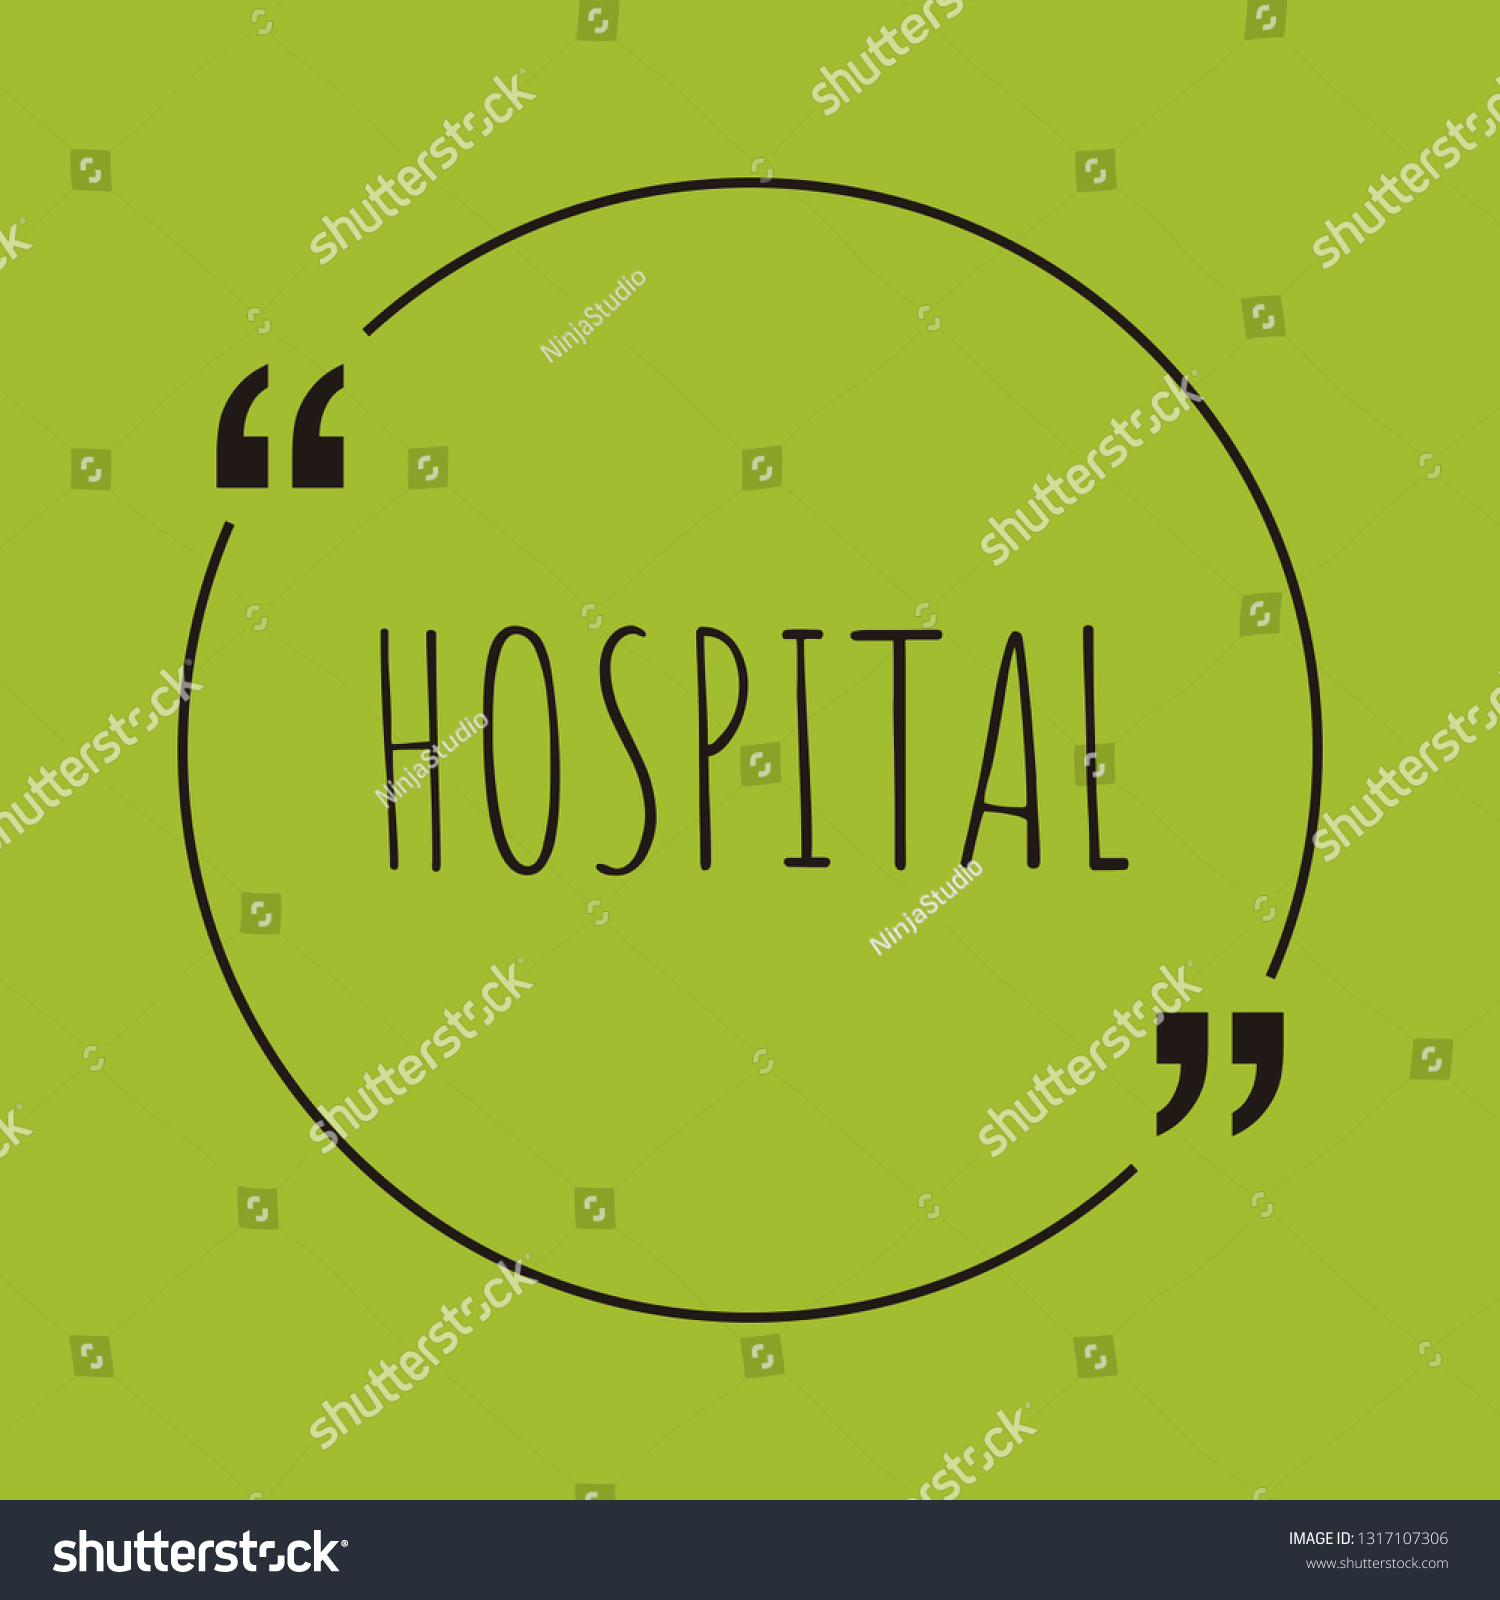 Hospital Word Concept Hospital On Green Stock Vector Royalty Free 1317107306